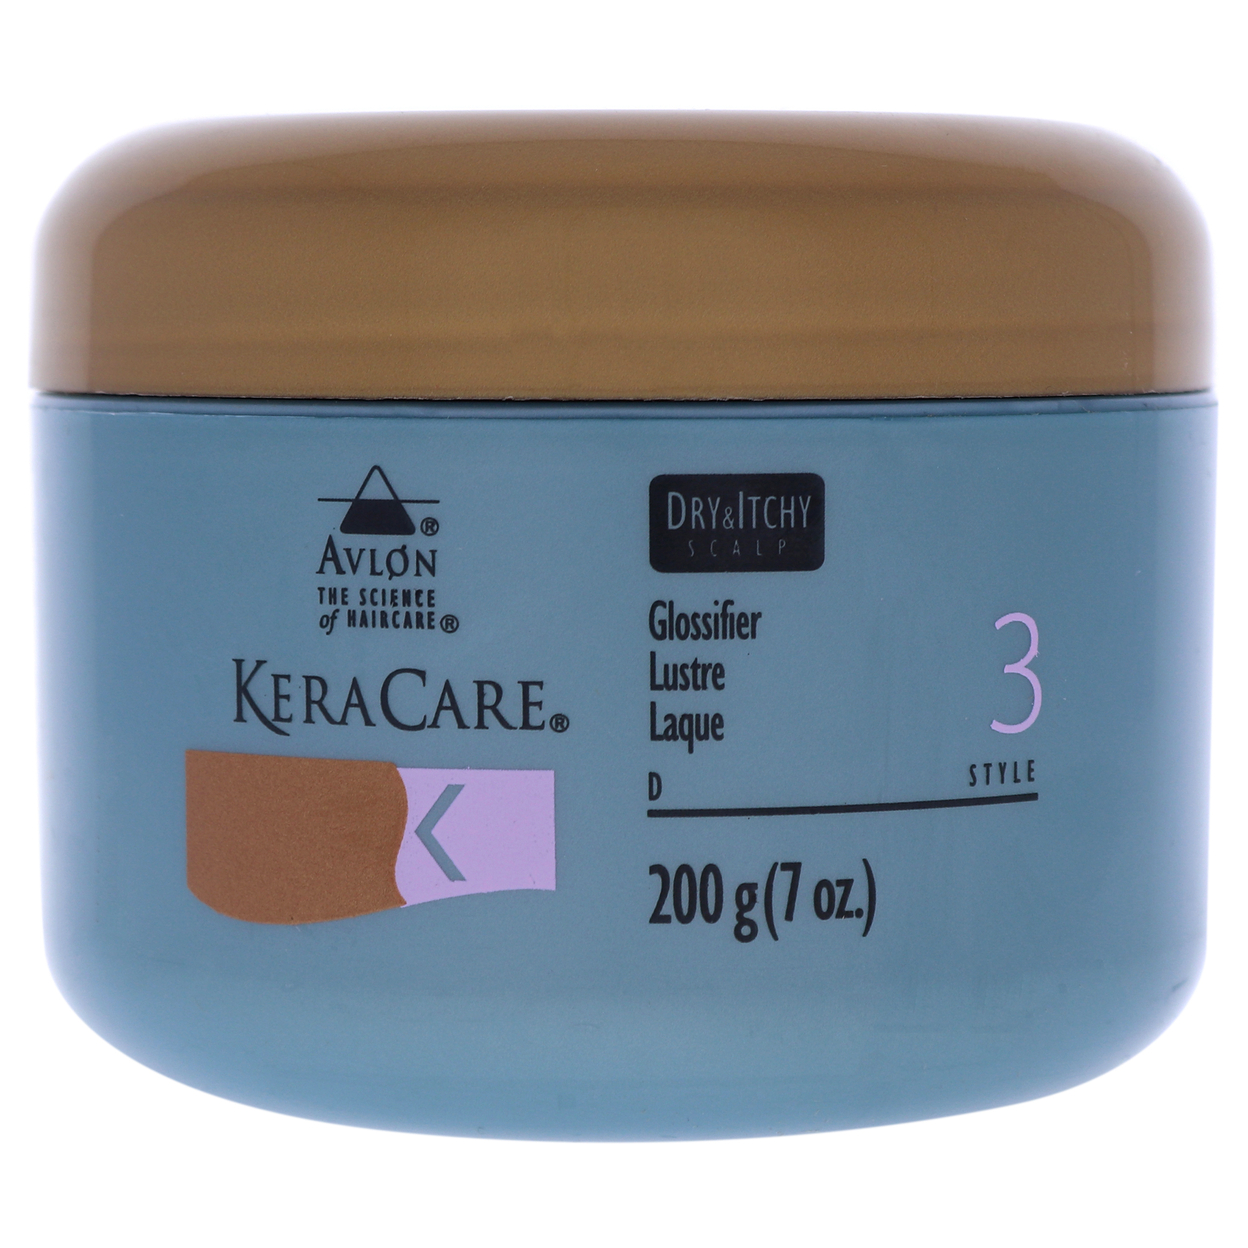 Avlon KeraCare Dry And Itchy Scalp Glossifier Treatment 7 Oz